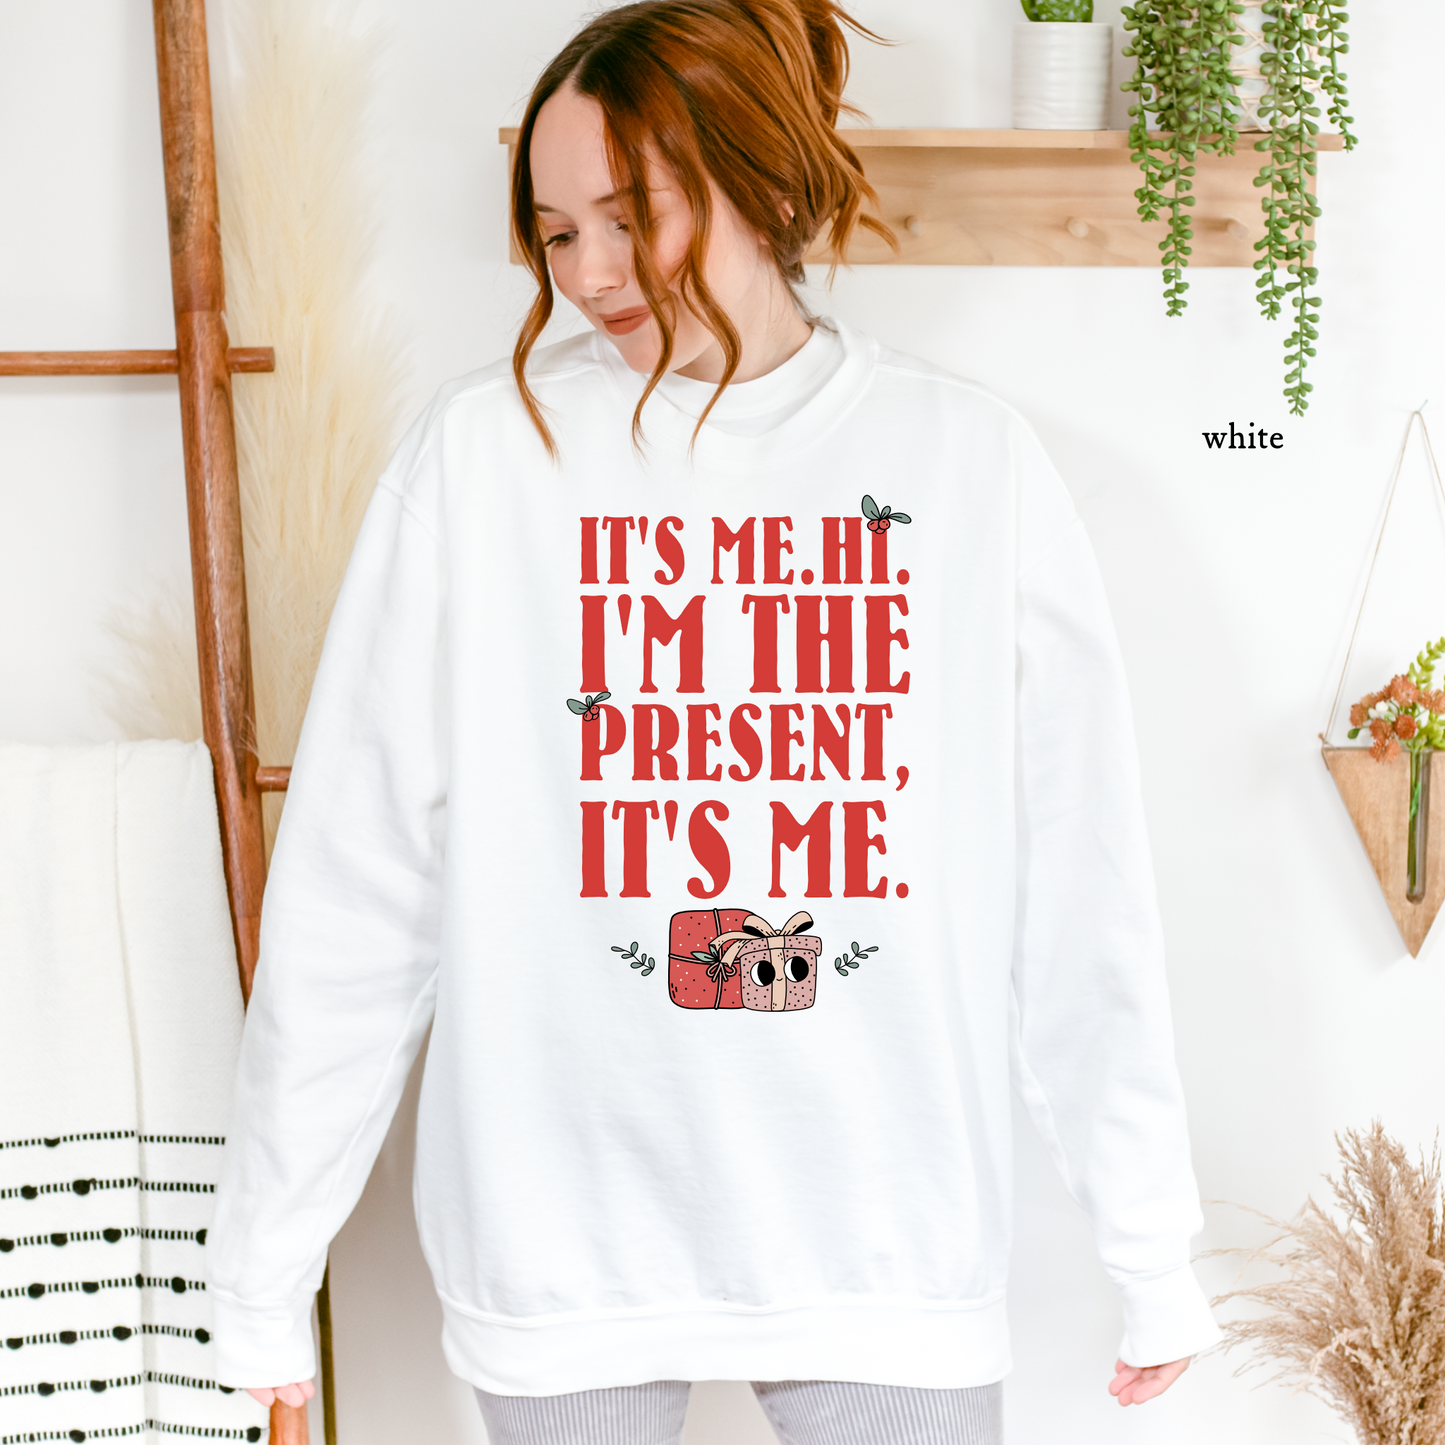 I'm The Present, It's Me | Christmas Independent Trading Comp. Sweatshirts